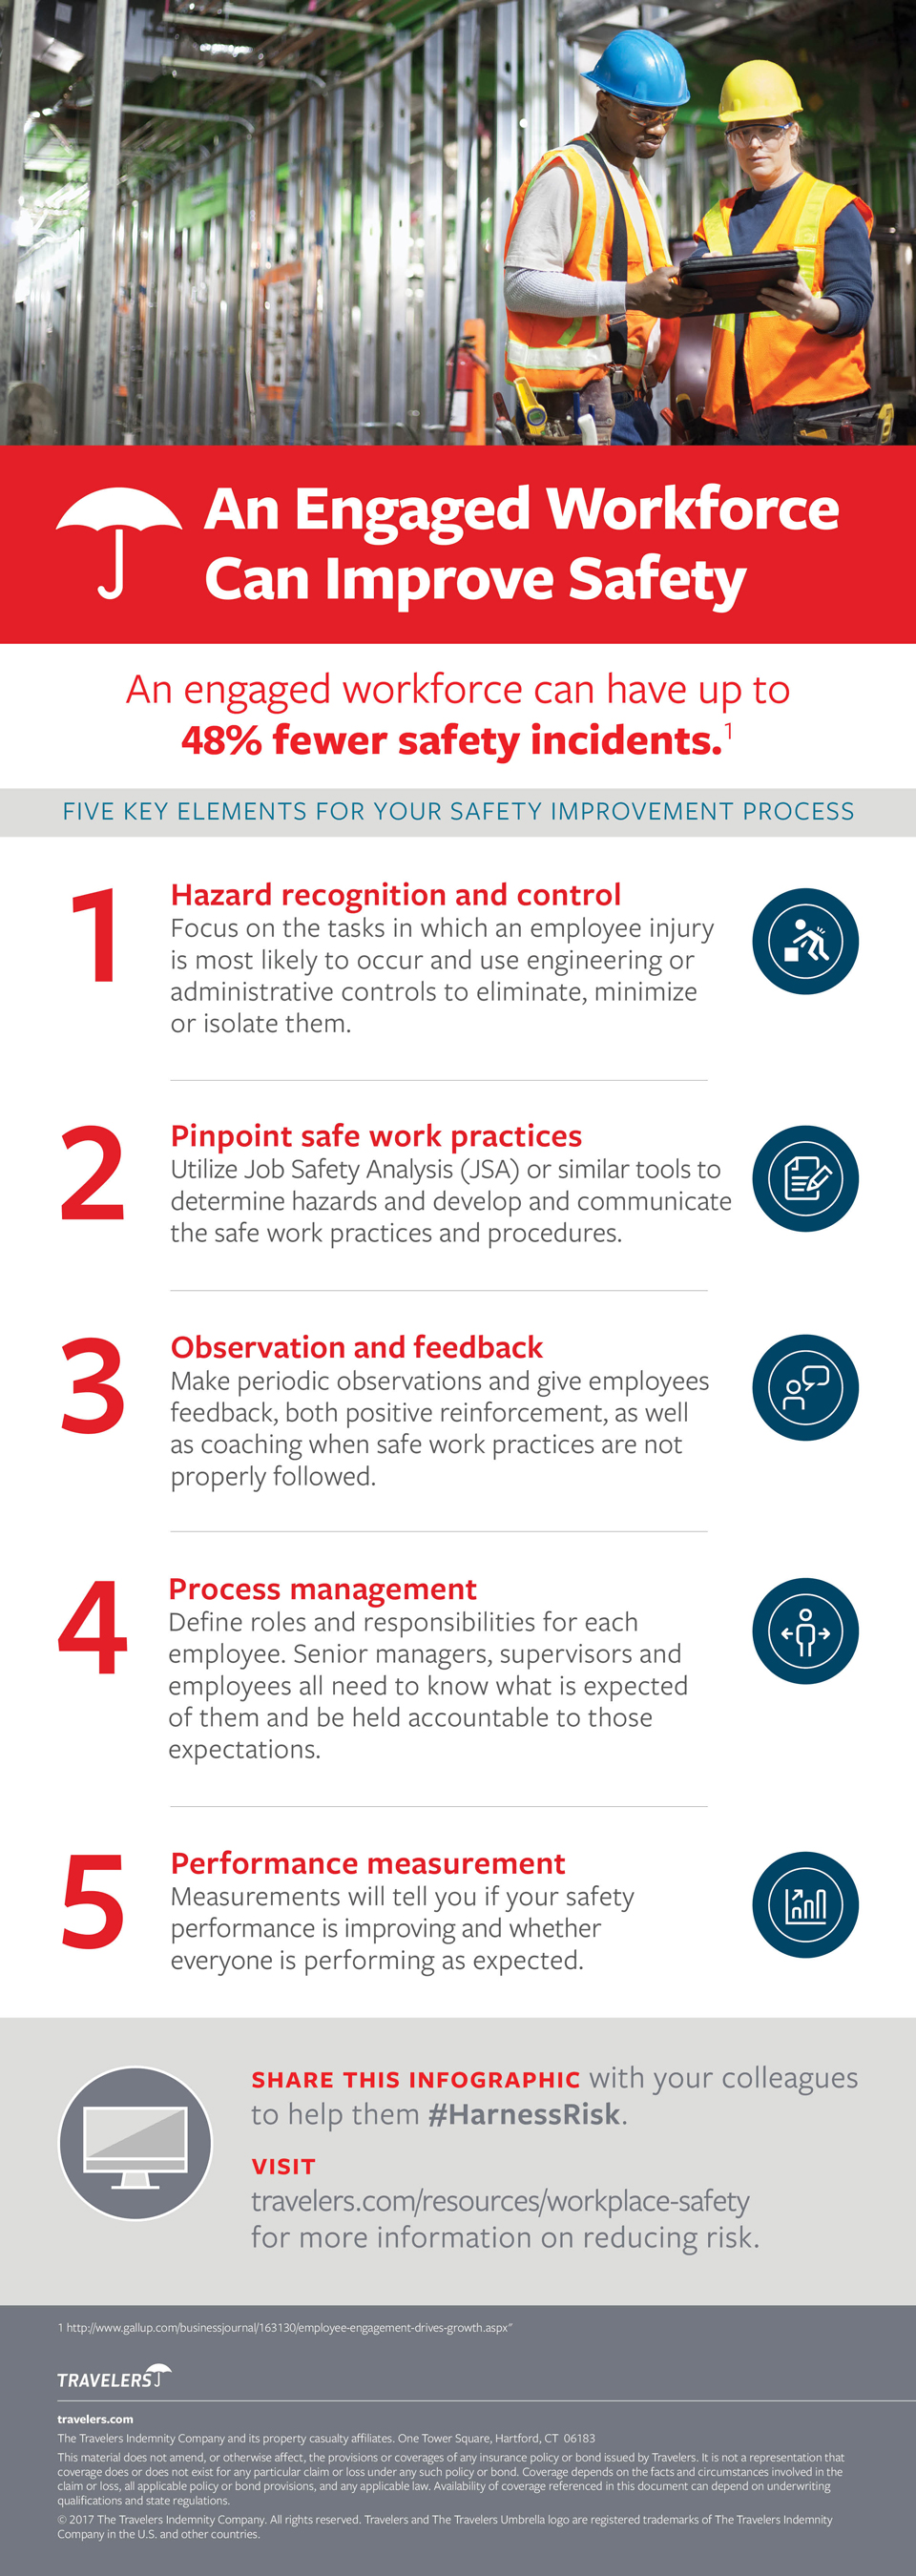 Engaged workforce can improve safety infographic.